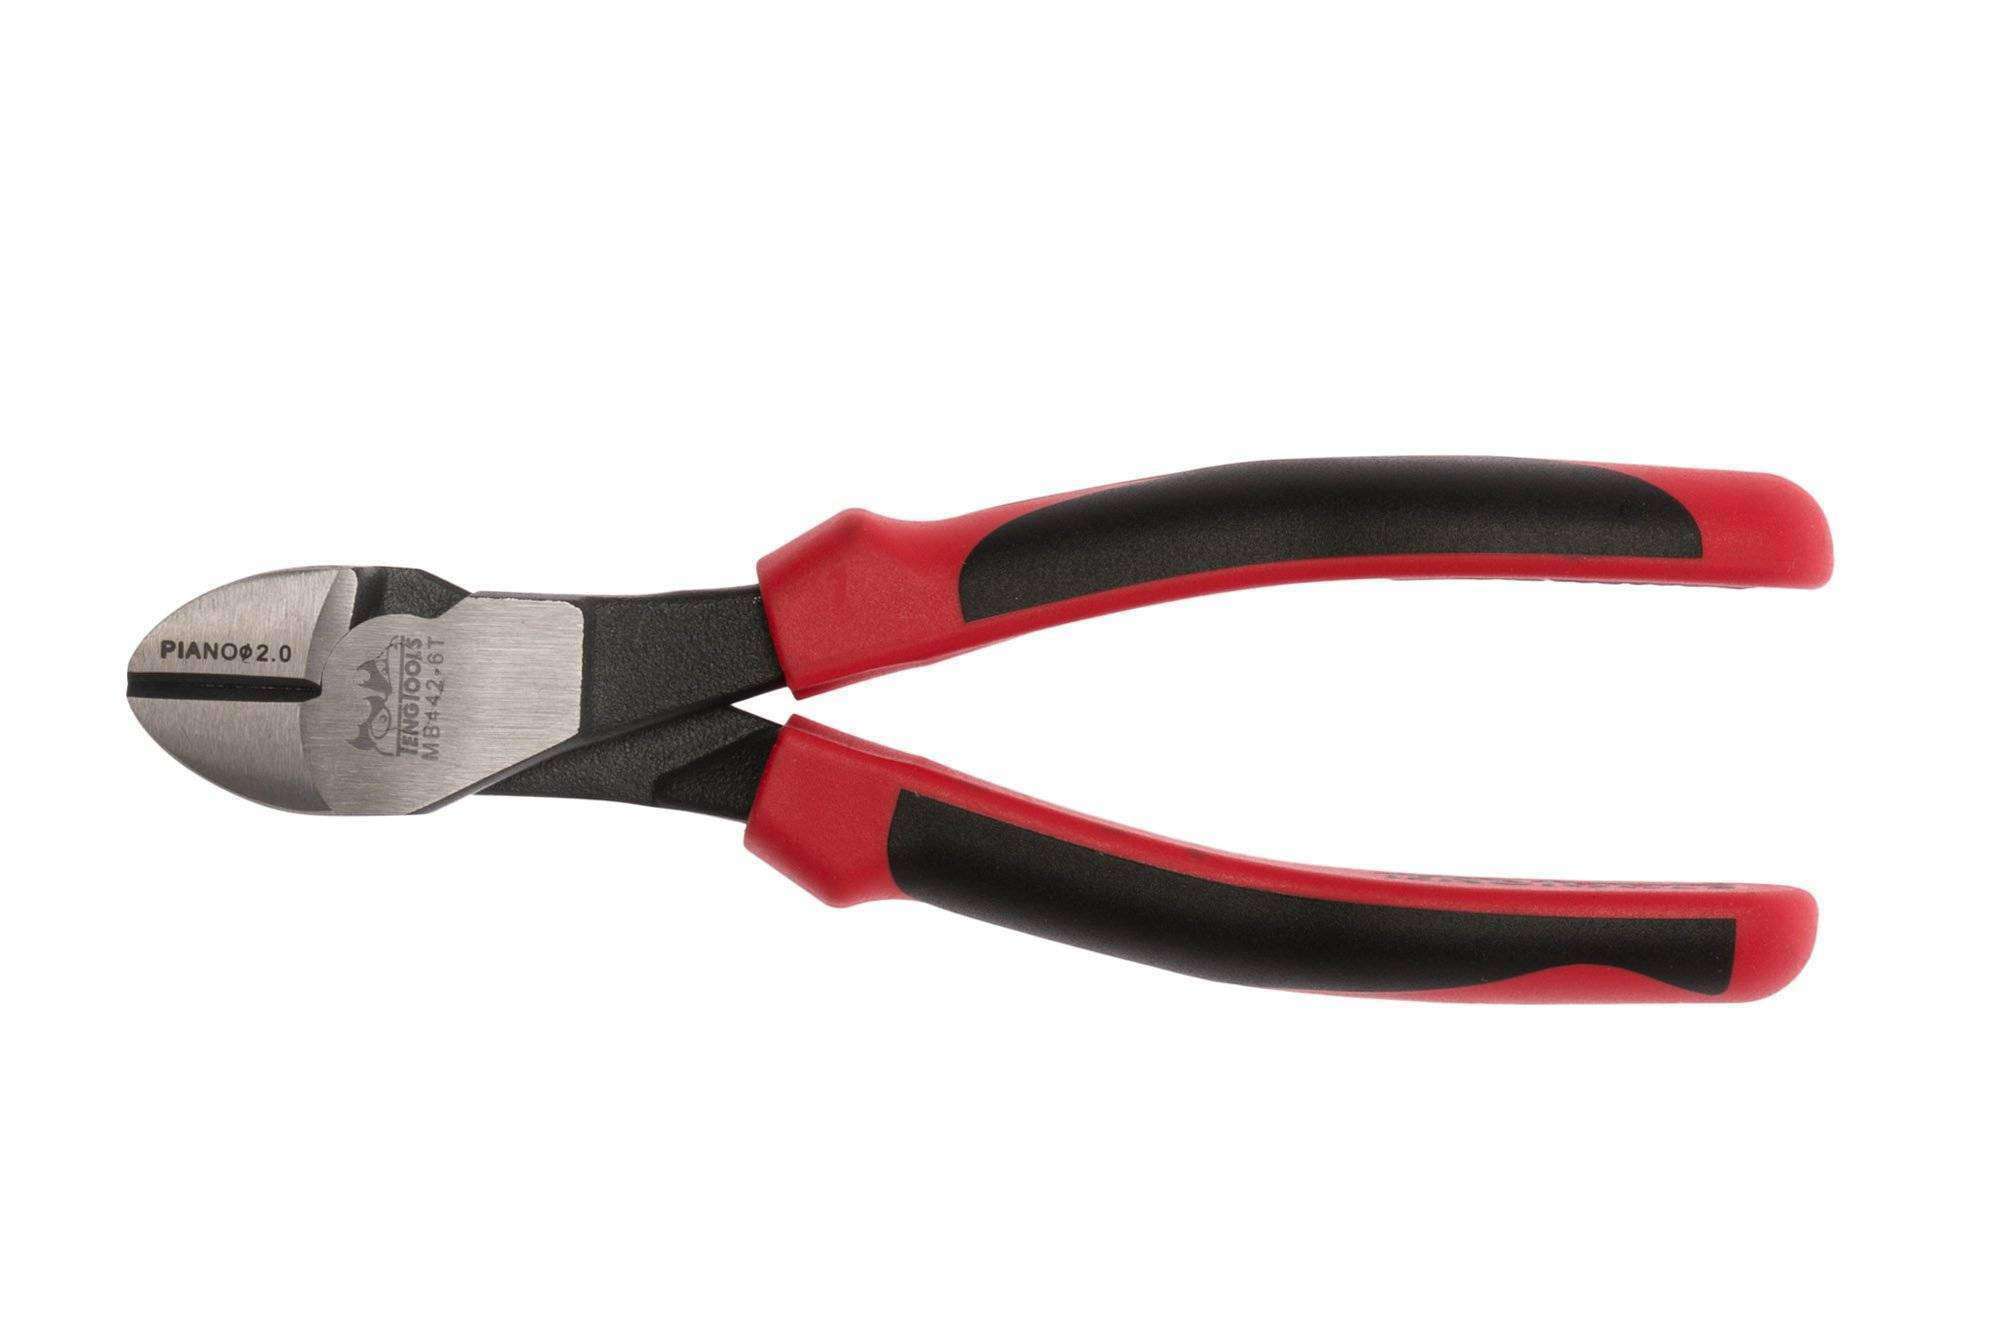 Teng Tools 6 Inch Heavy Duty Precision Side Cutting Pliers With TPR Grip Handles - MB442-6T